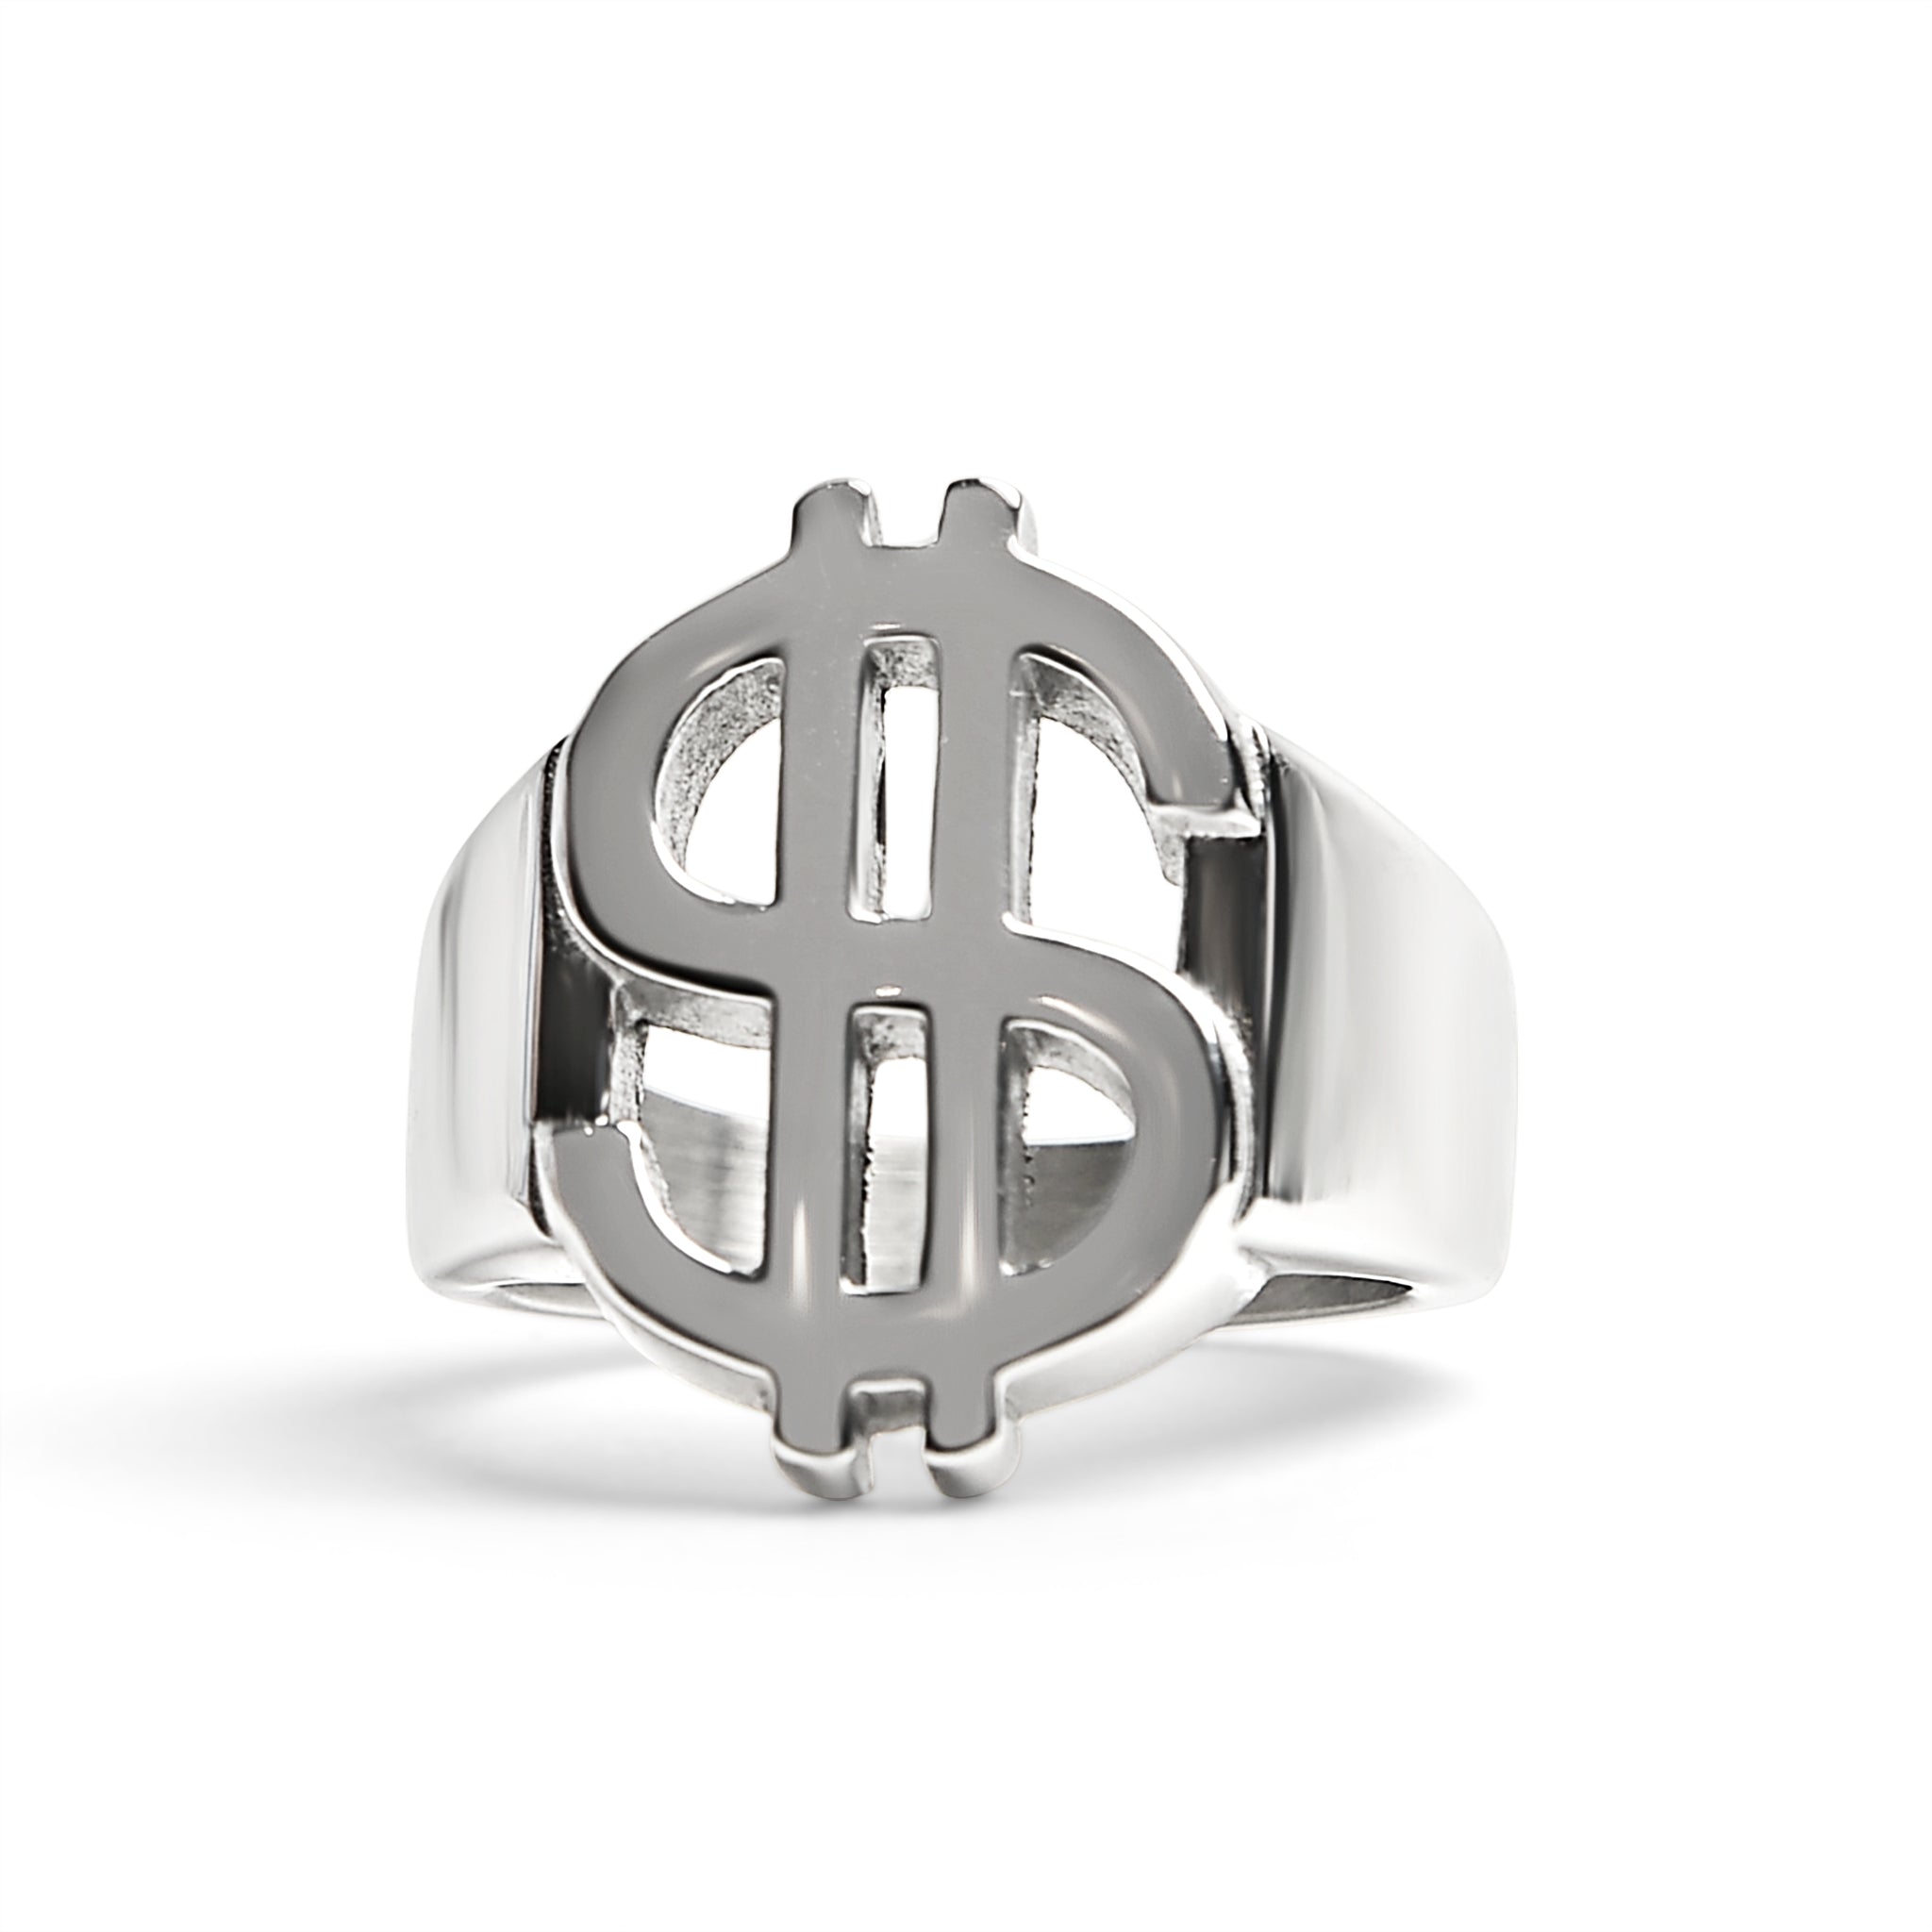 Stainless Steel Money Sign Mens Ring / SCR4115